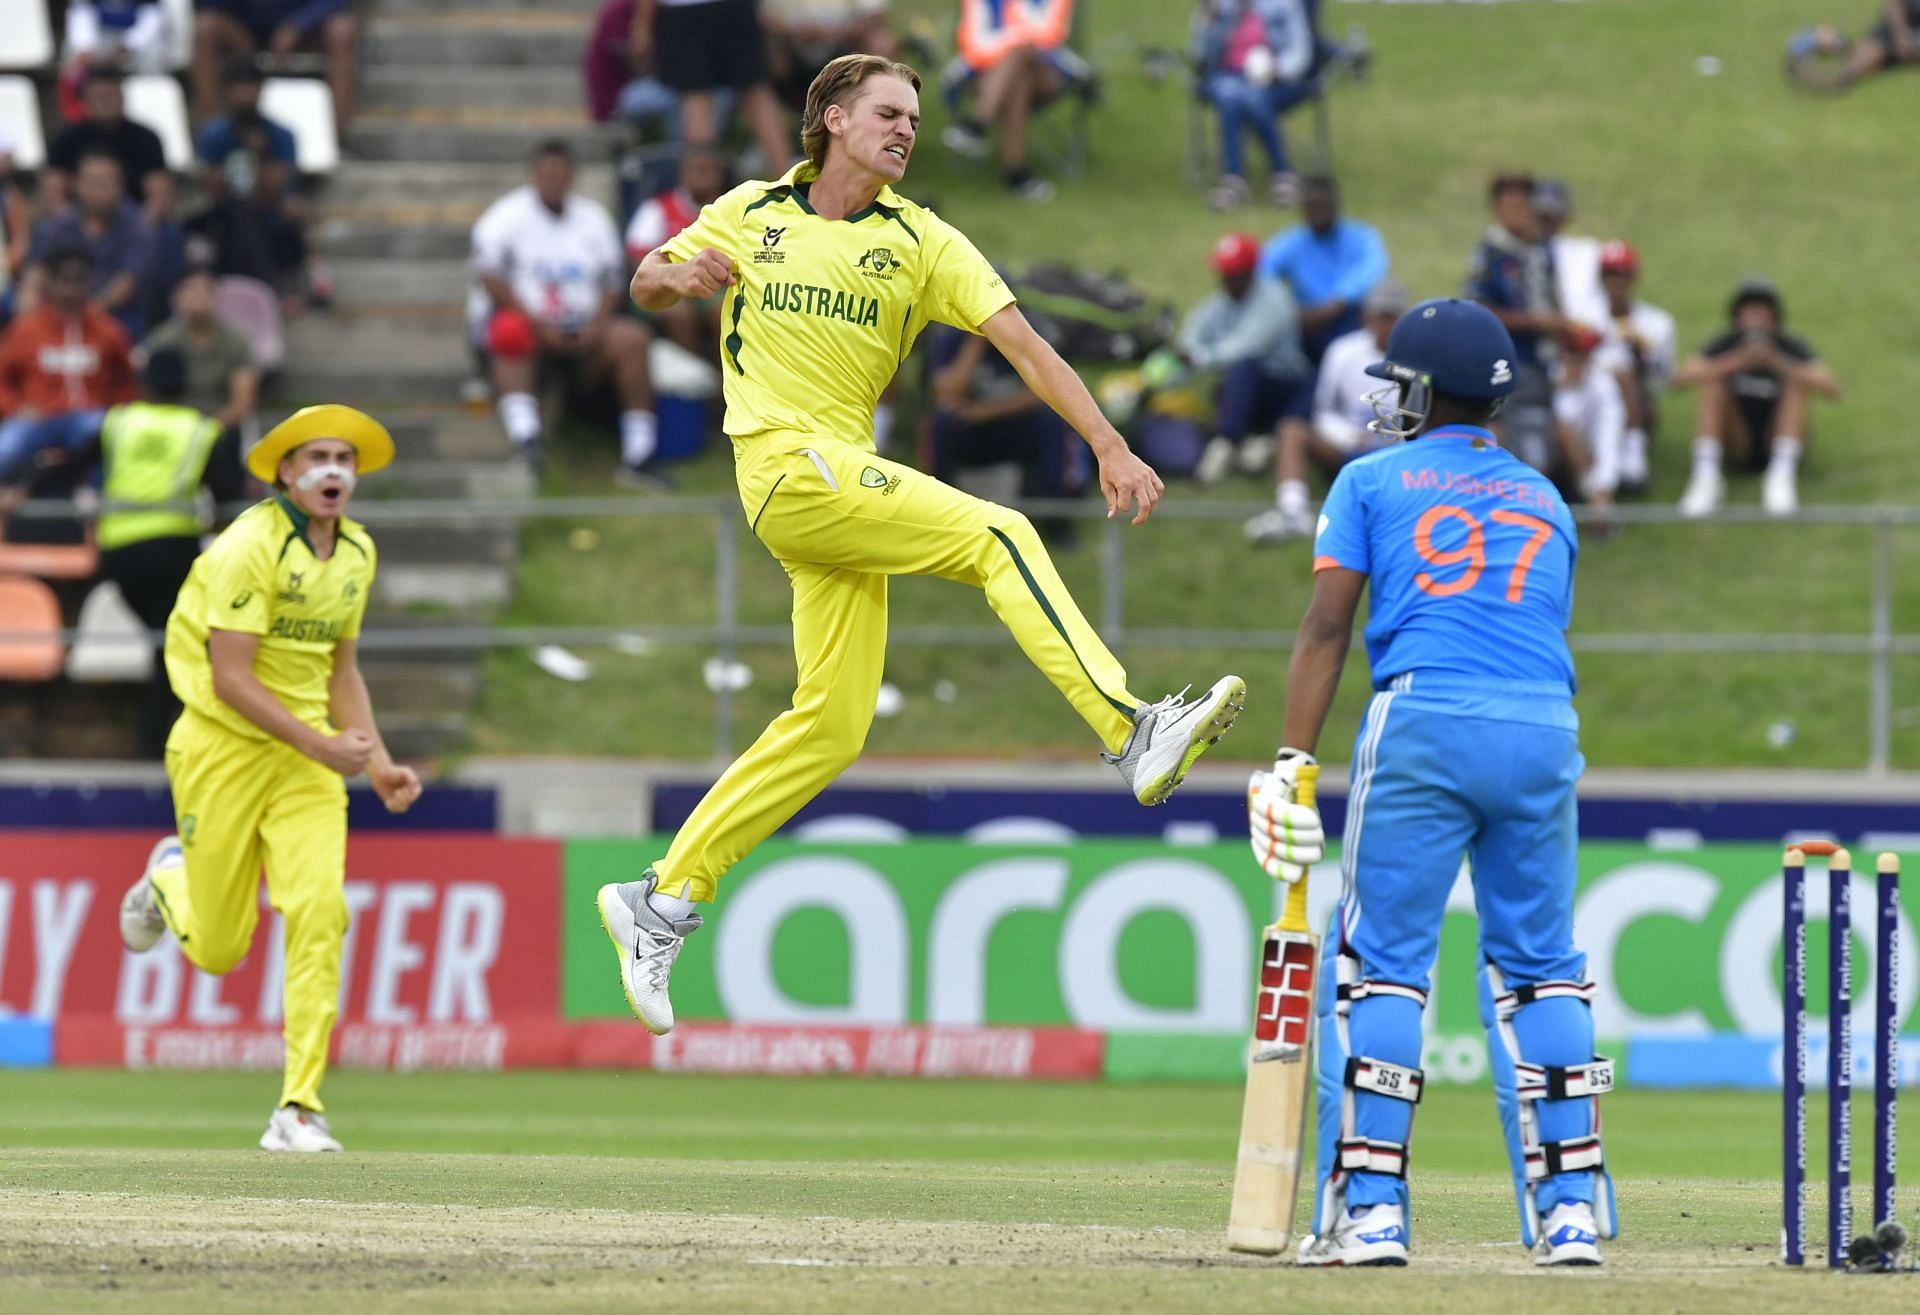 The Australian seamers troubled the Indian batters with short balls. [P/C: Getty]